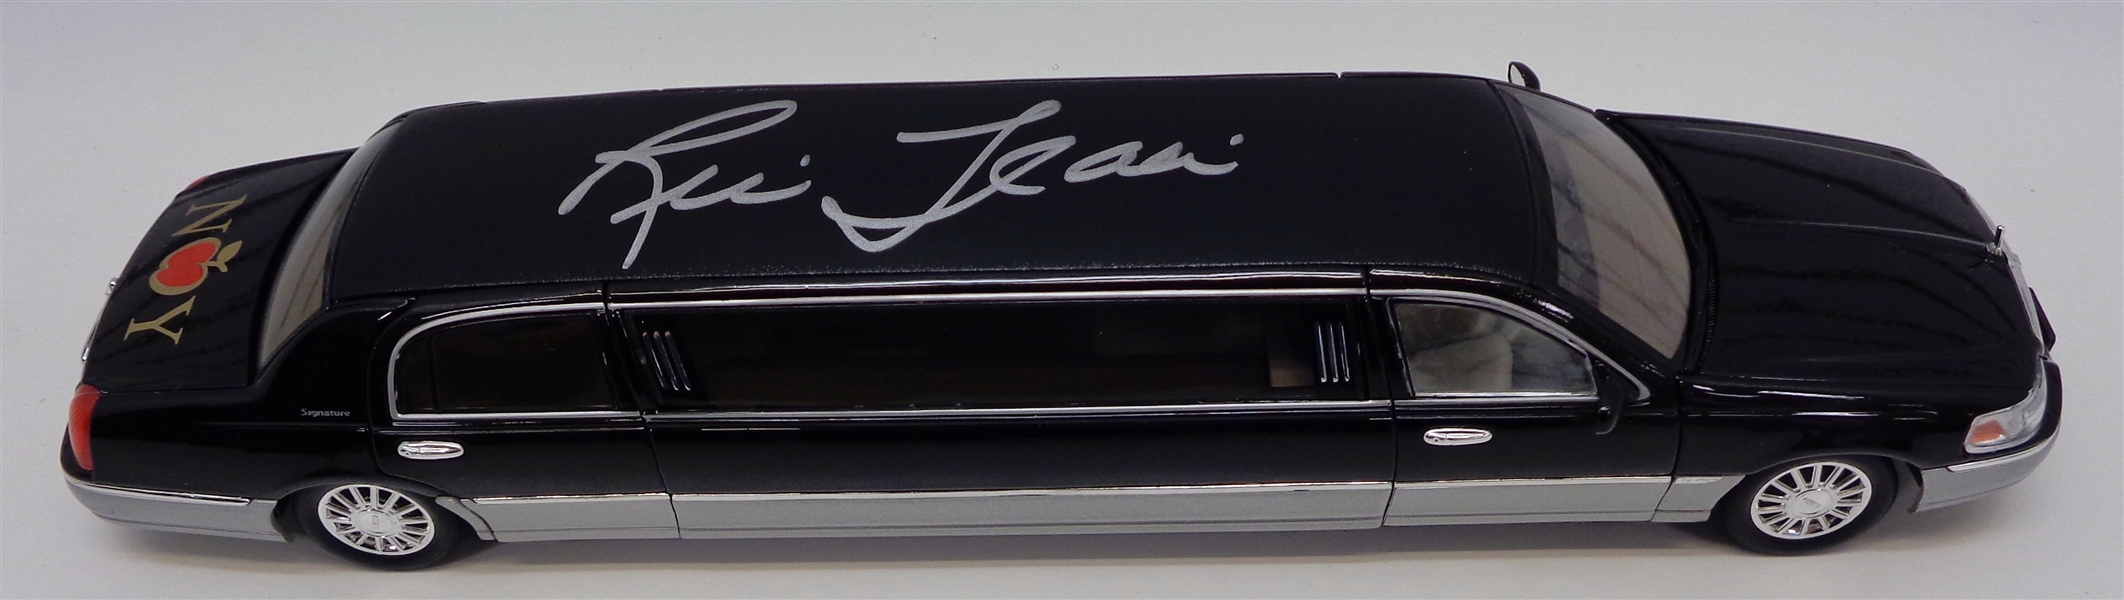 Ric Flair Signed Black 1:28 Scale Lincoln Limousine